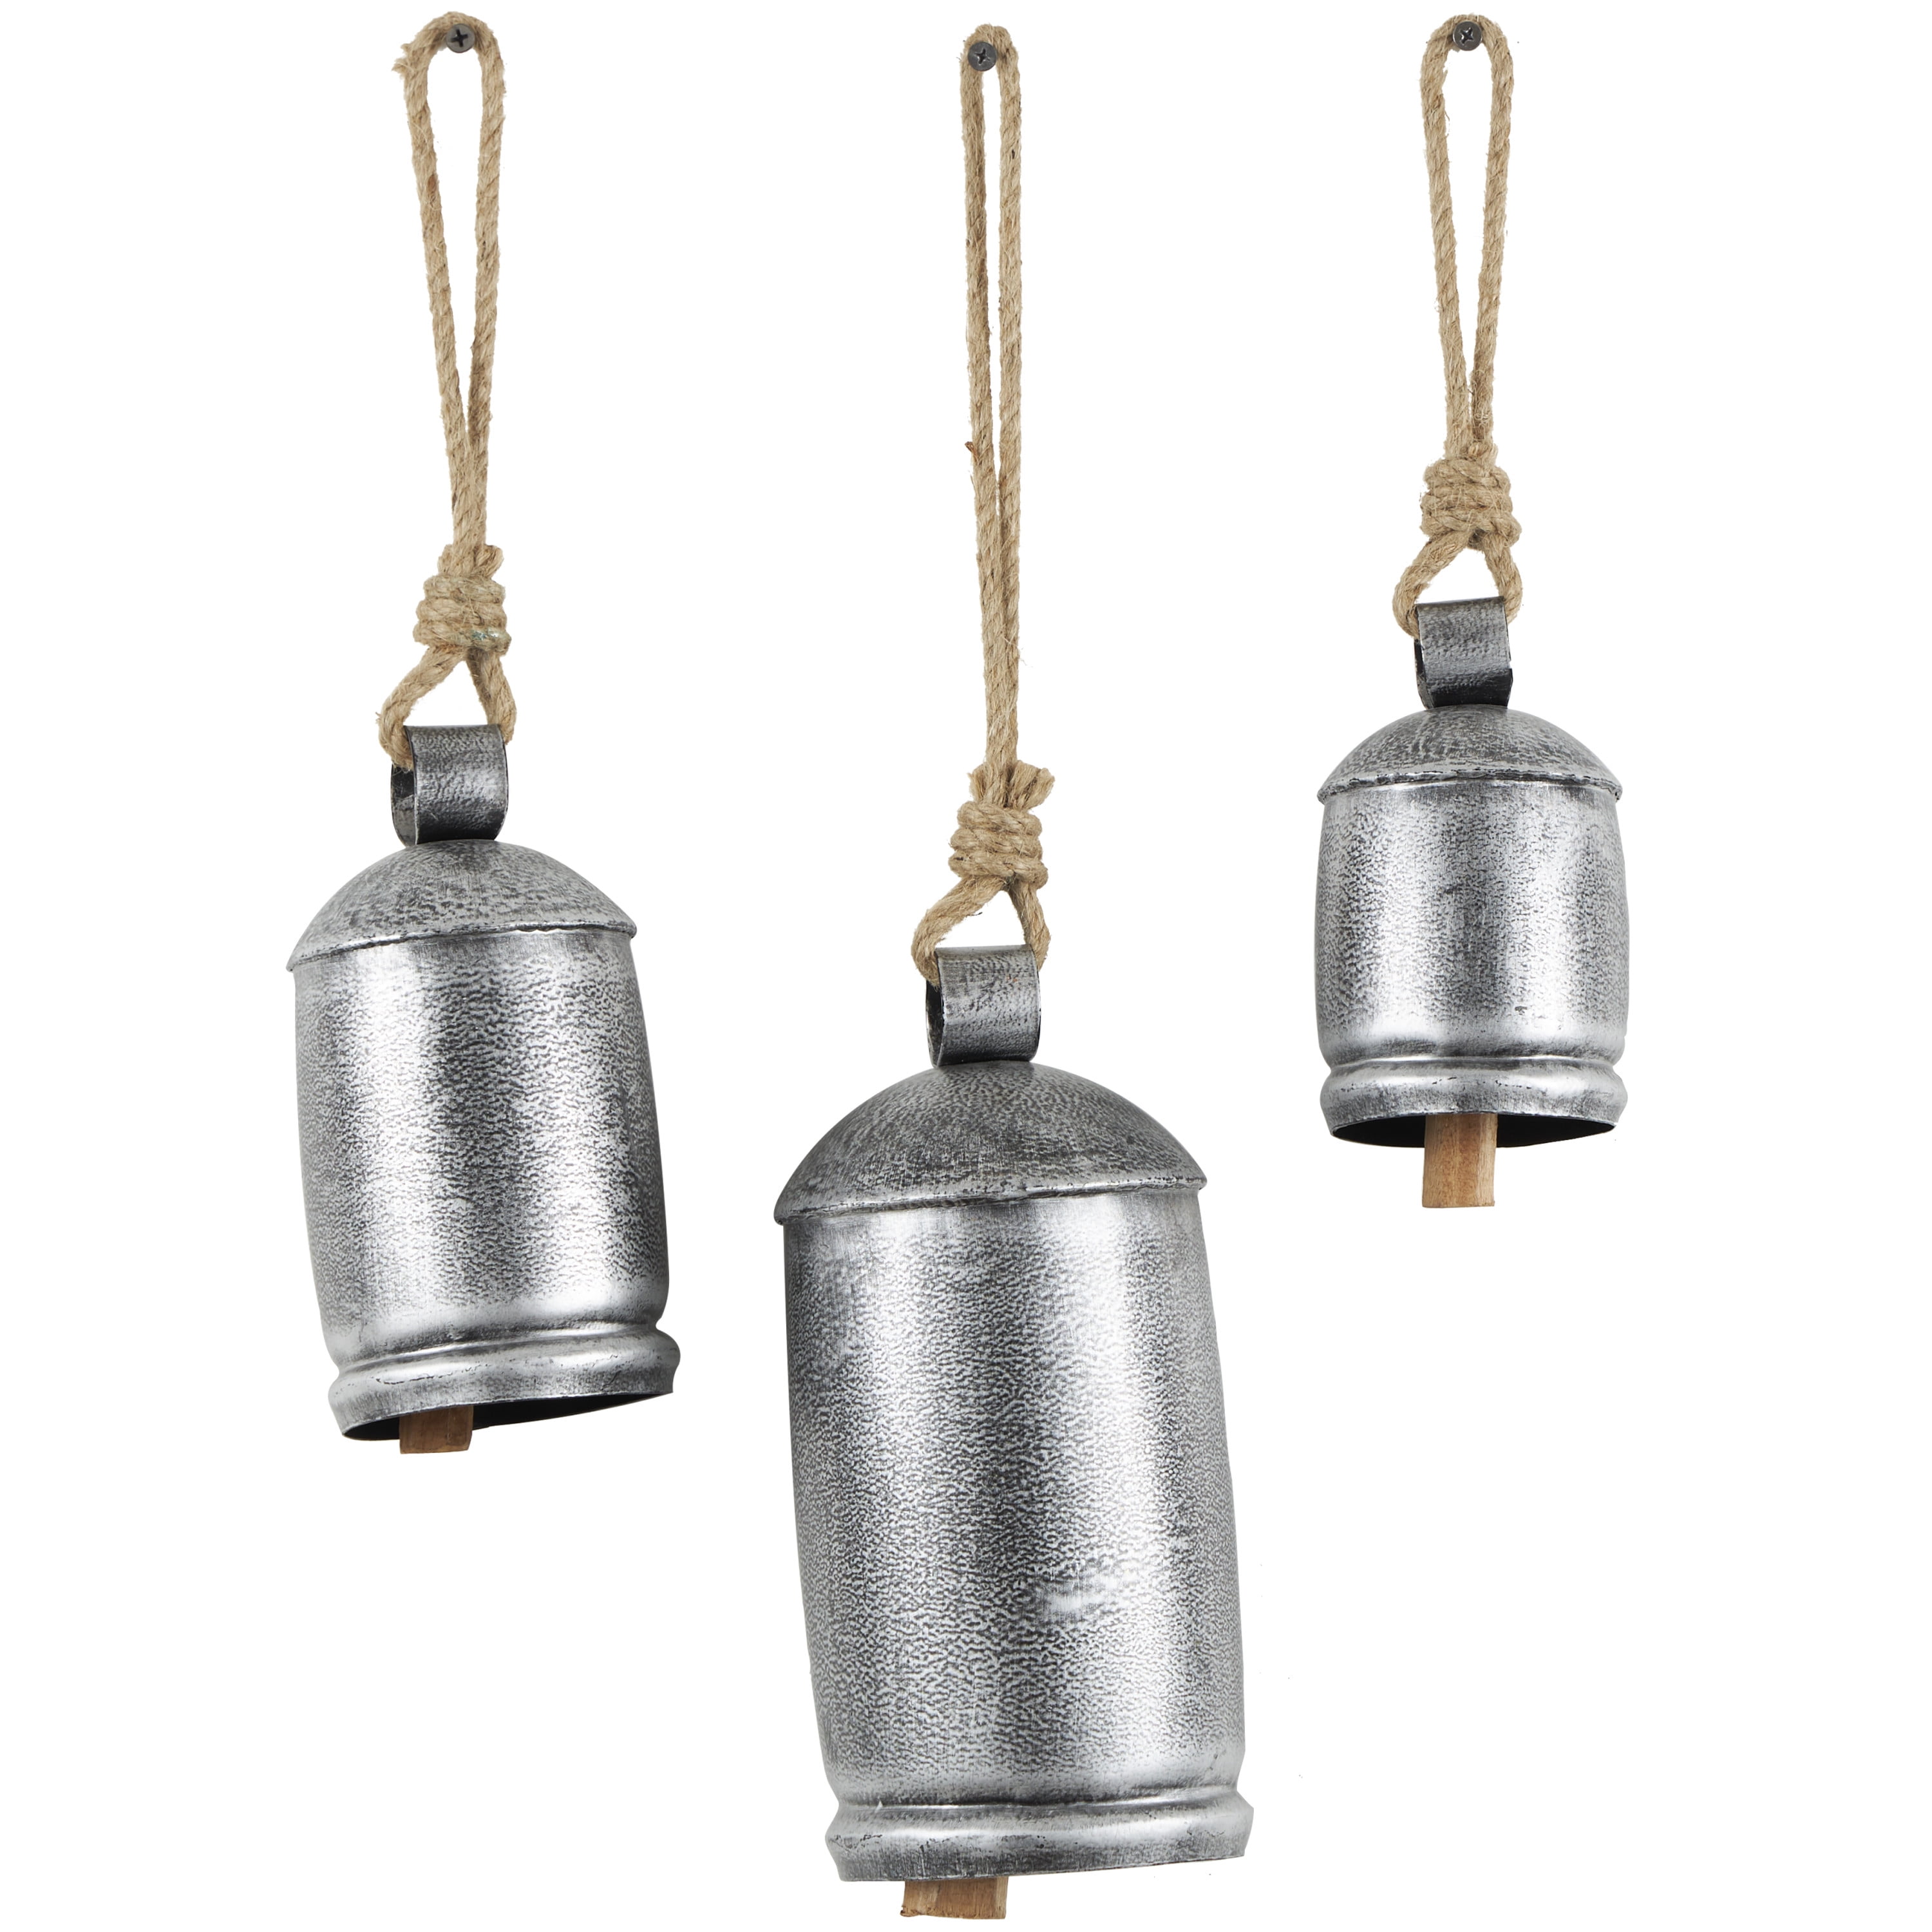 Big bell stock photo. Image of chime, bell, bellhop, metallic - 11085976